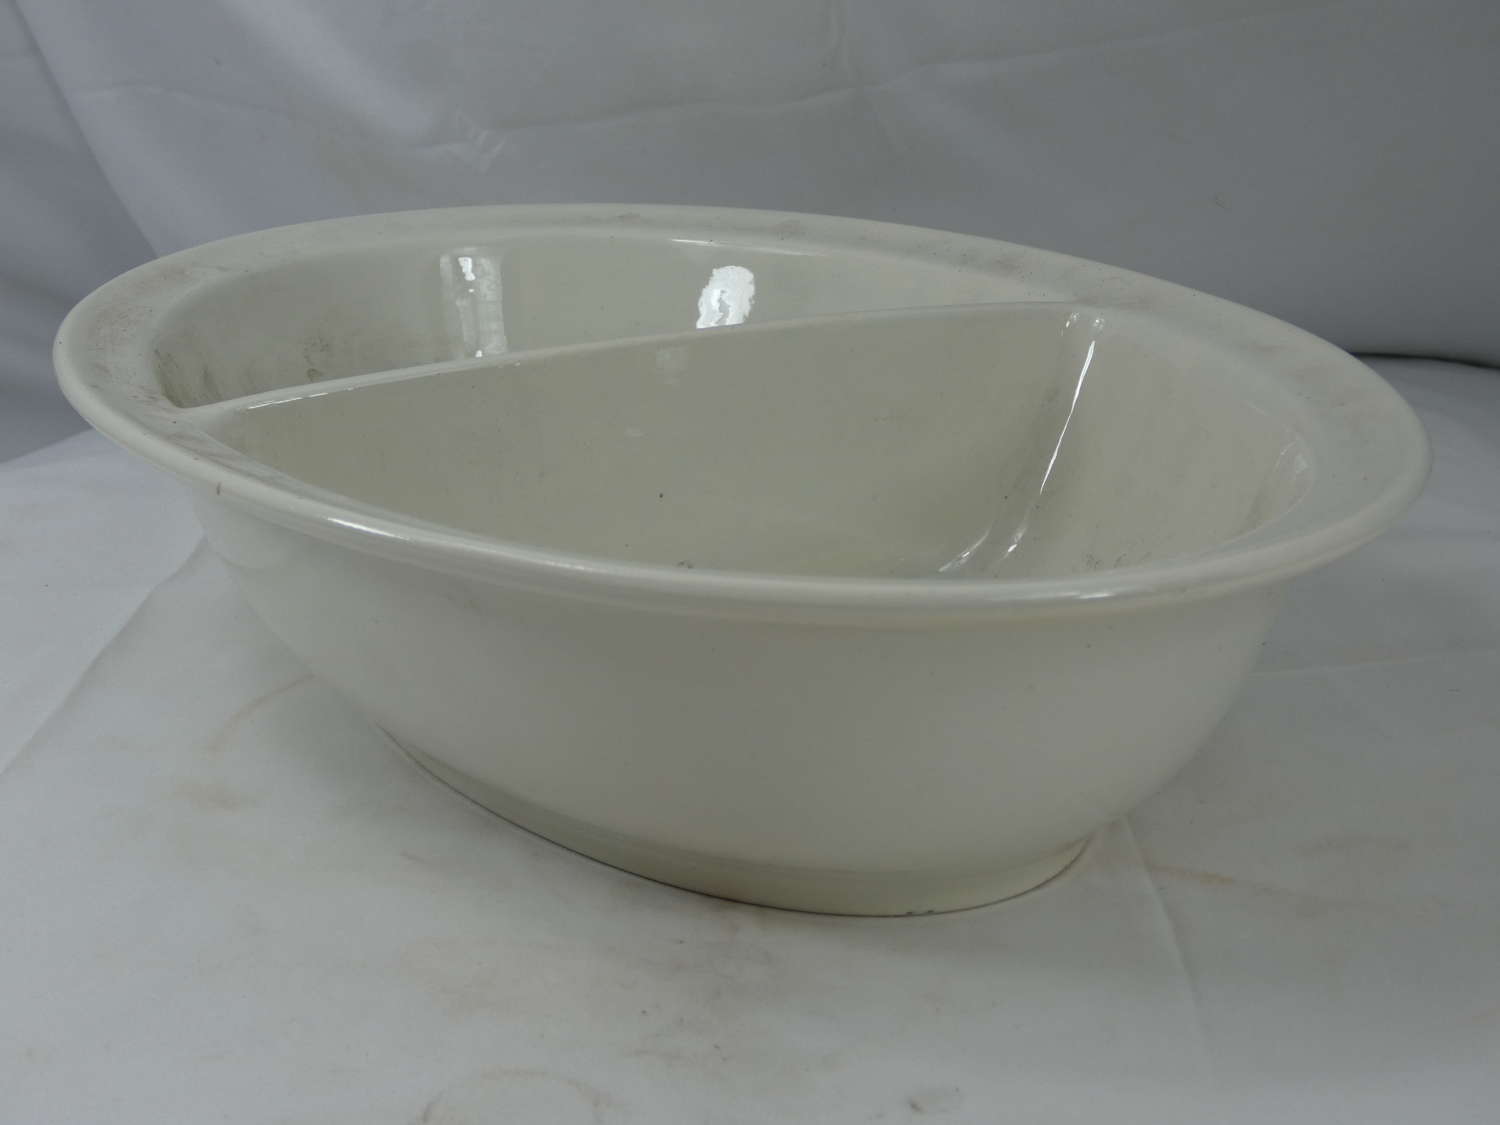 WW2 German Army Officers Mess Serving Bowl